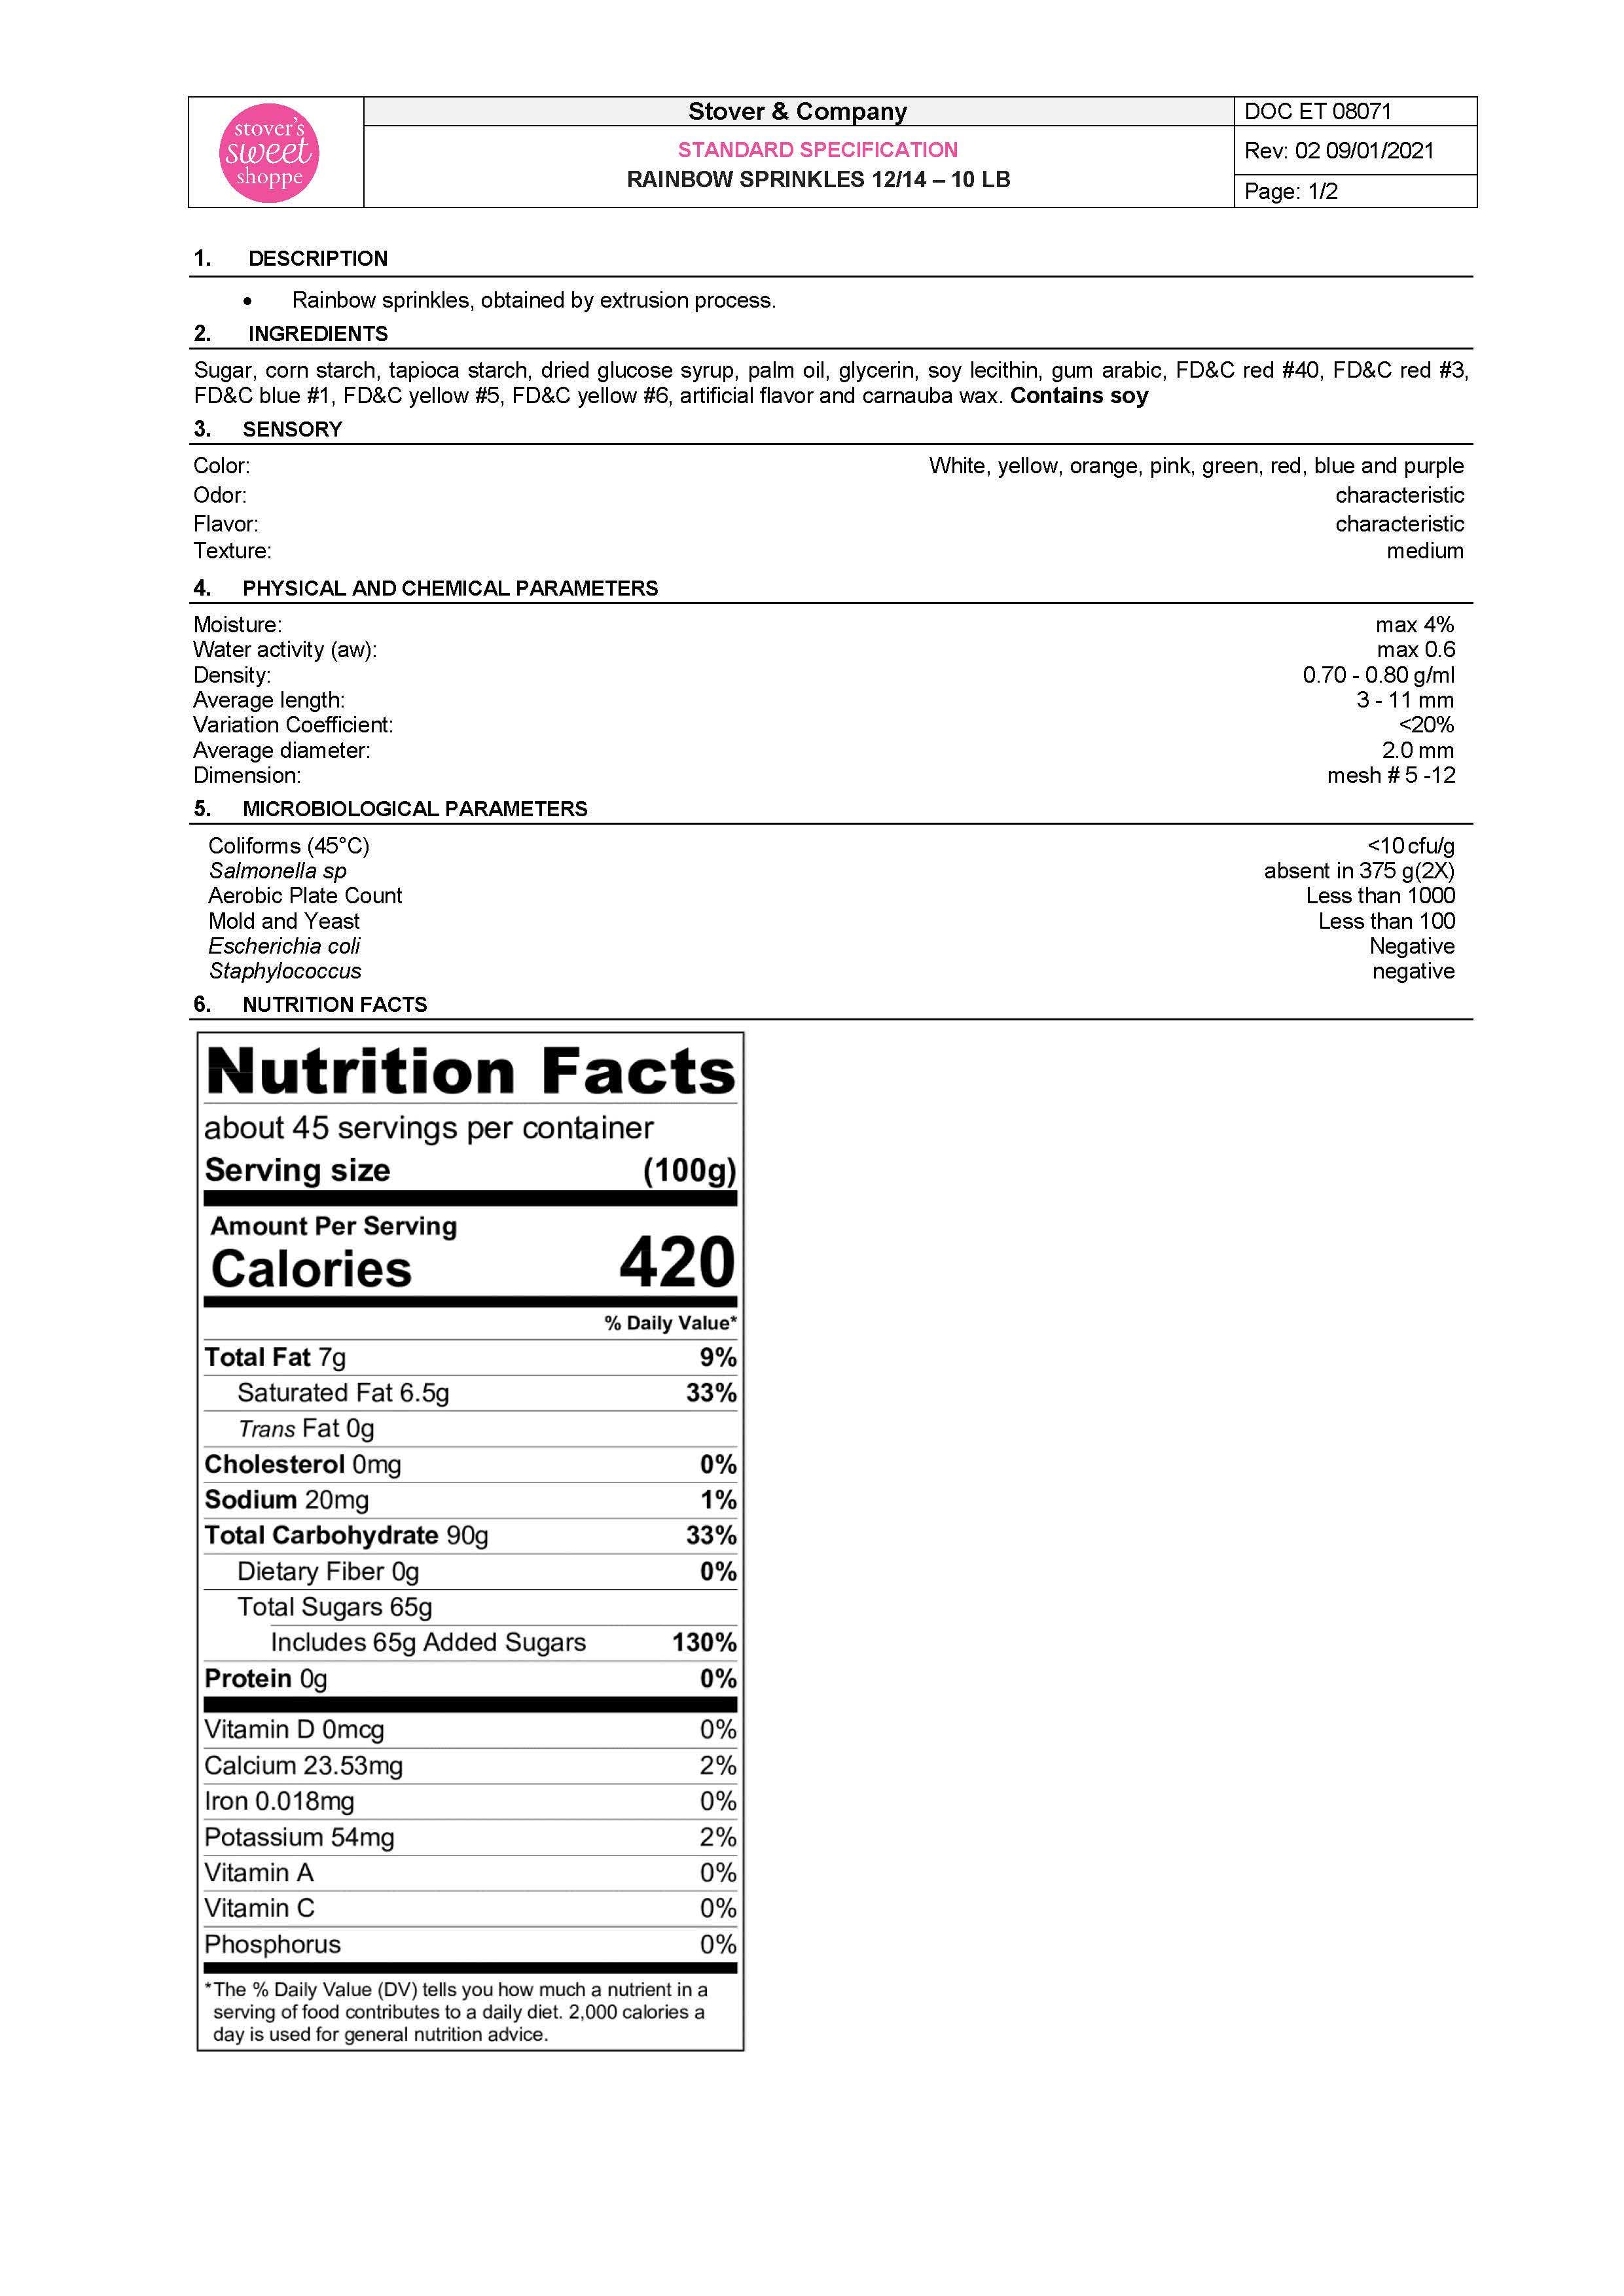 Rainbow Sprinkles Nutritional Info Page 1 by Stover's Sweet Shoppe at Stover & Company